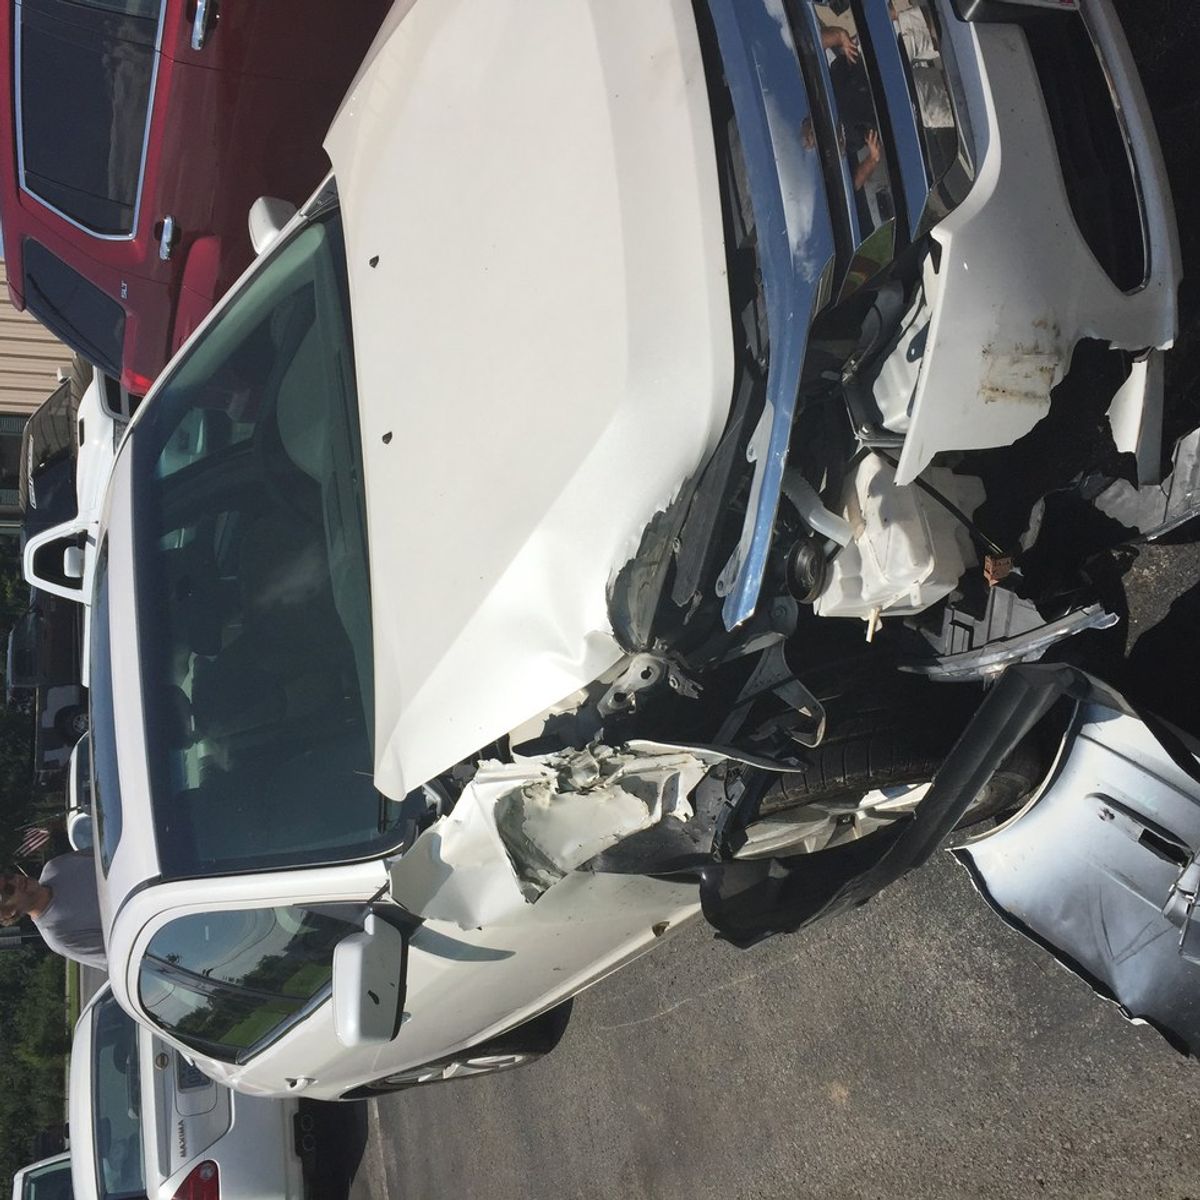 PTSD: My First Car Accident